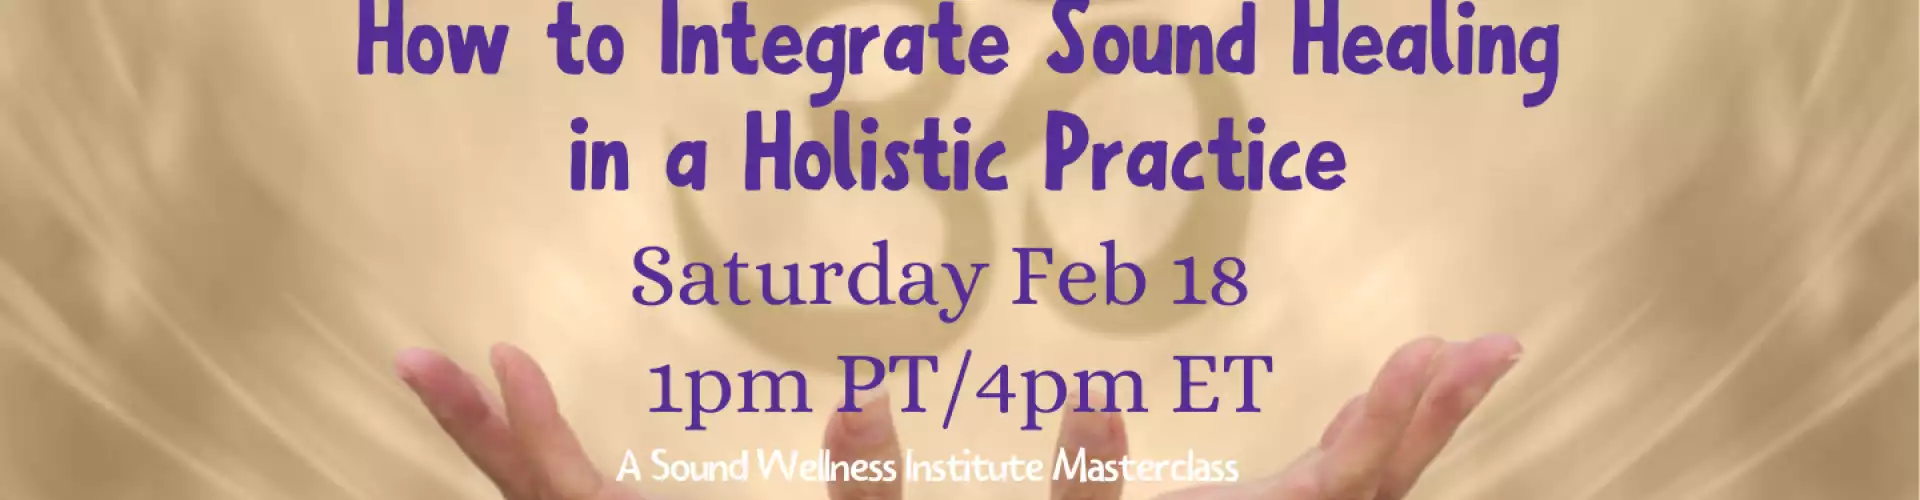 How to Integrate Sound Healing into a Holistic Practice